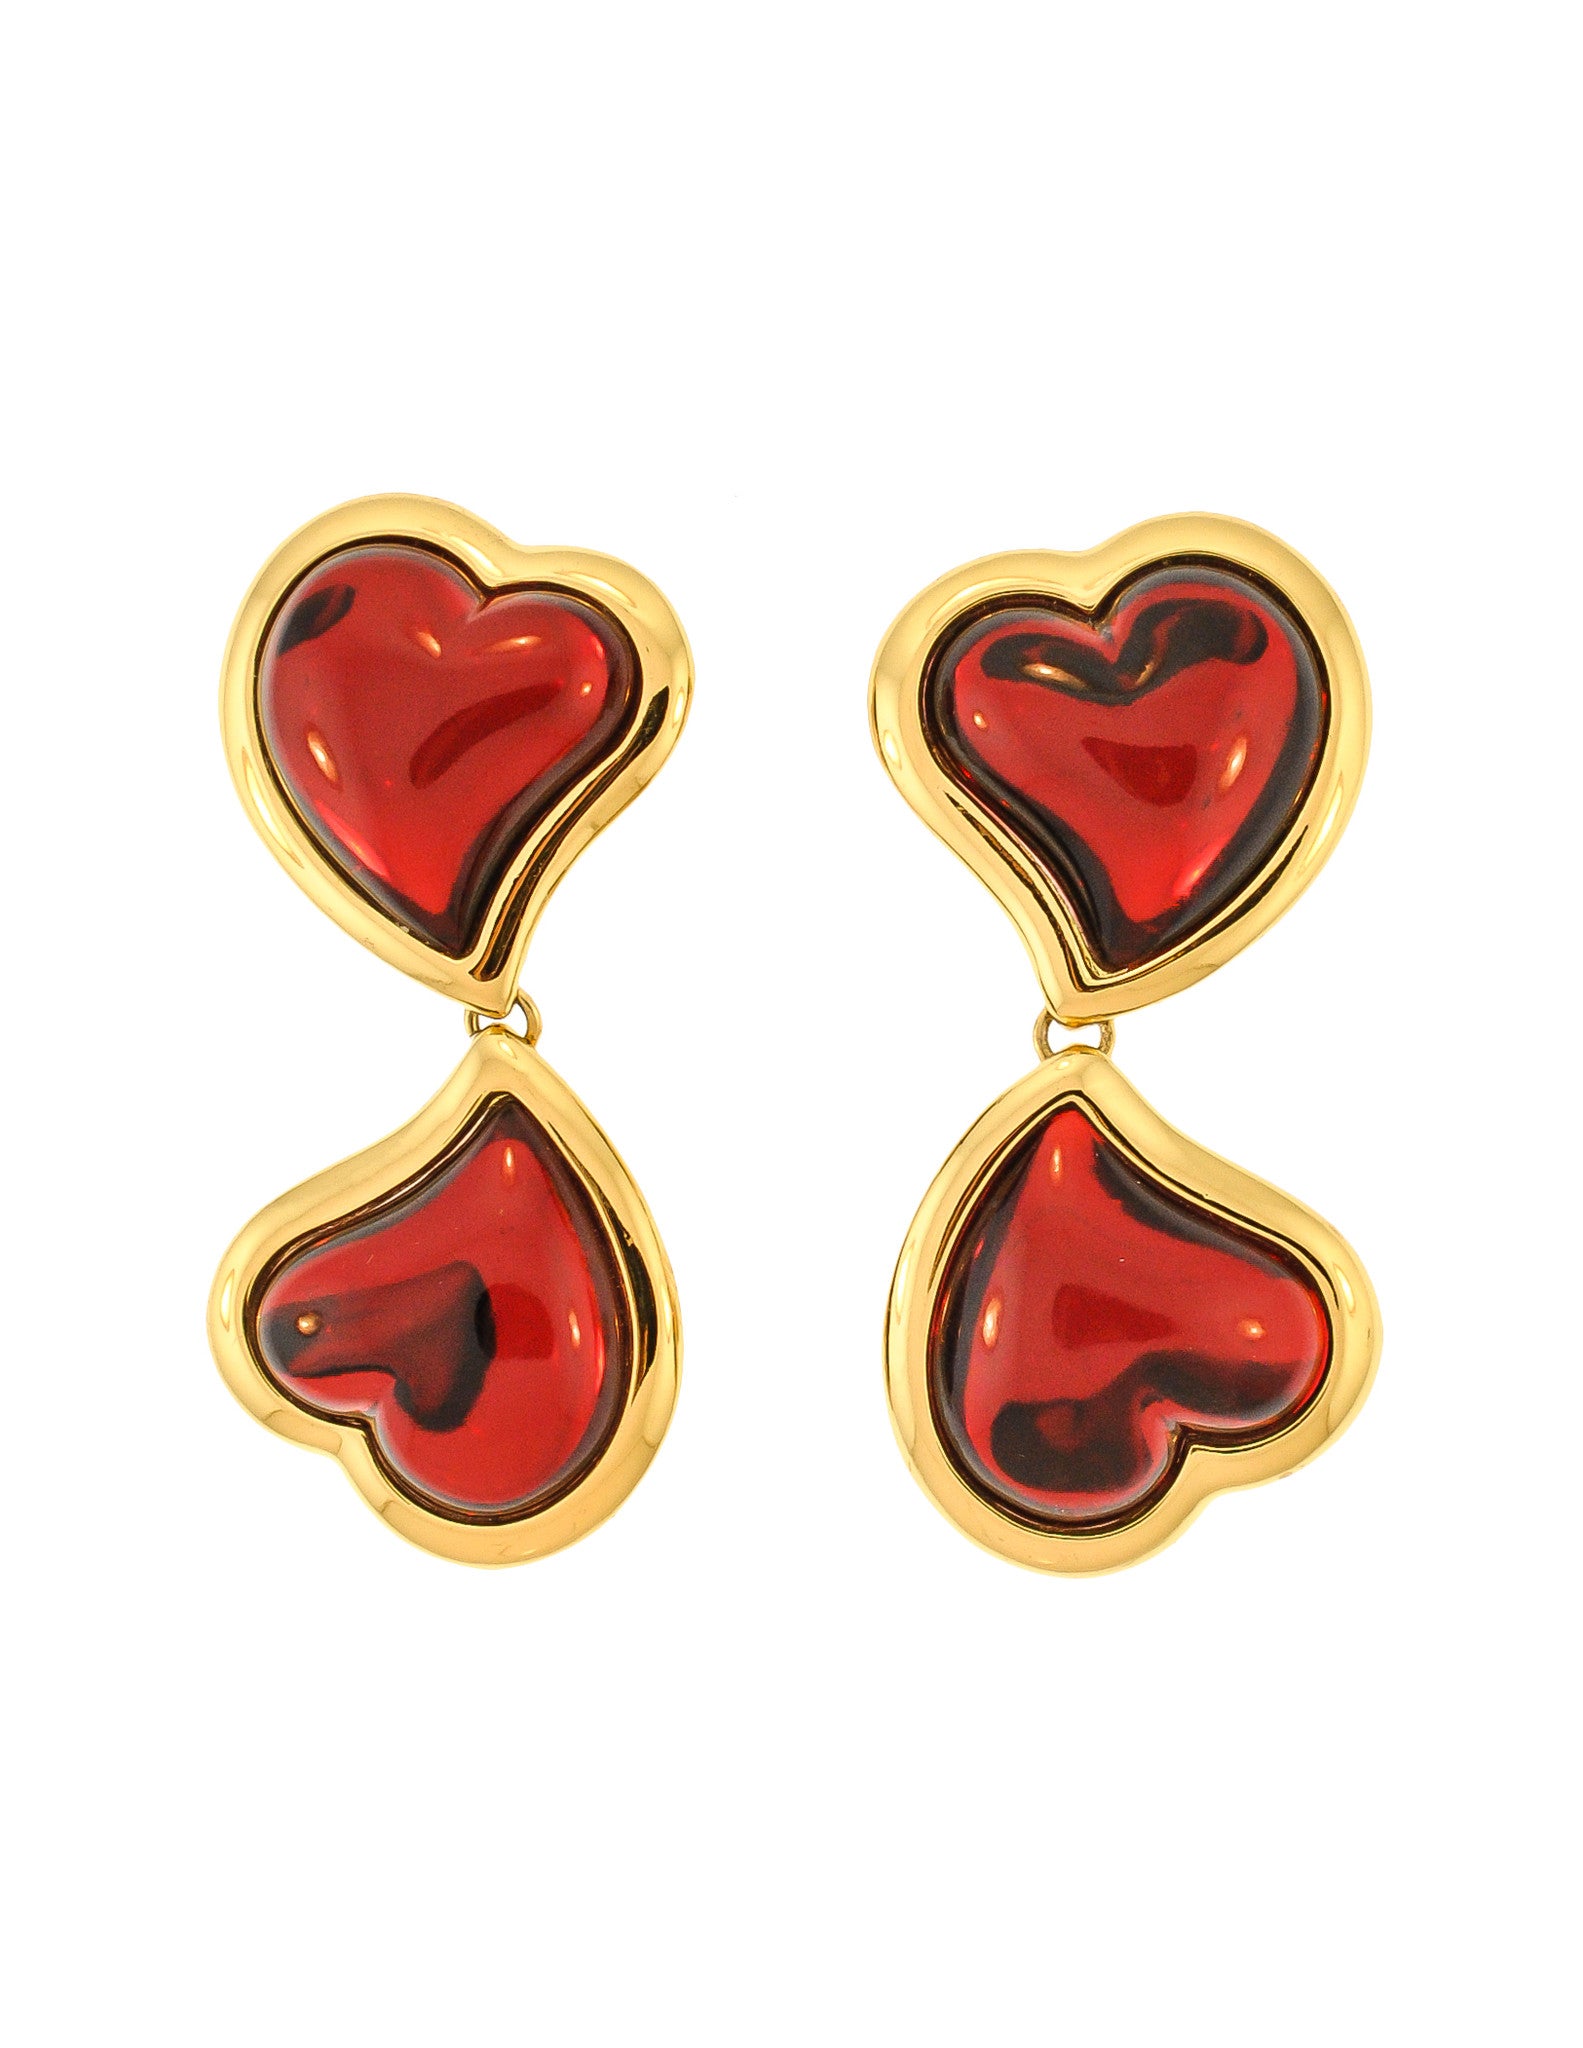 YSL Vintage Double Red Heart Earrings - from Amarcord Vintage Fashion